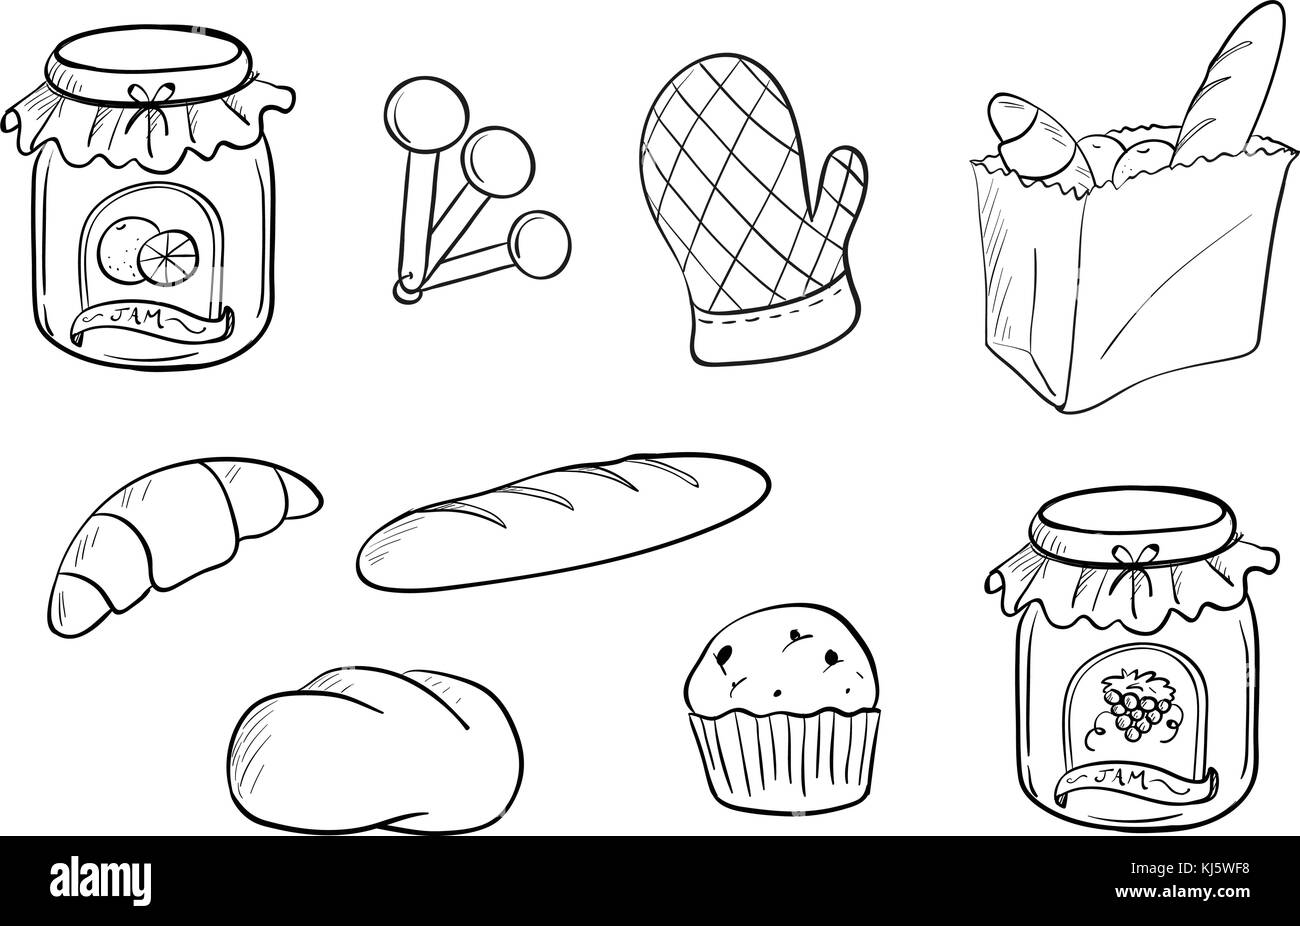 Illustration of a doodle design of bread and jam on a white background Stock Vector